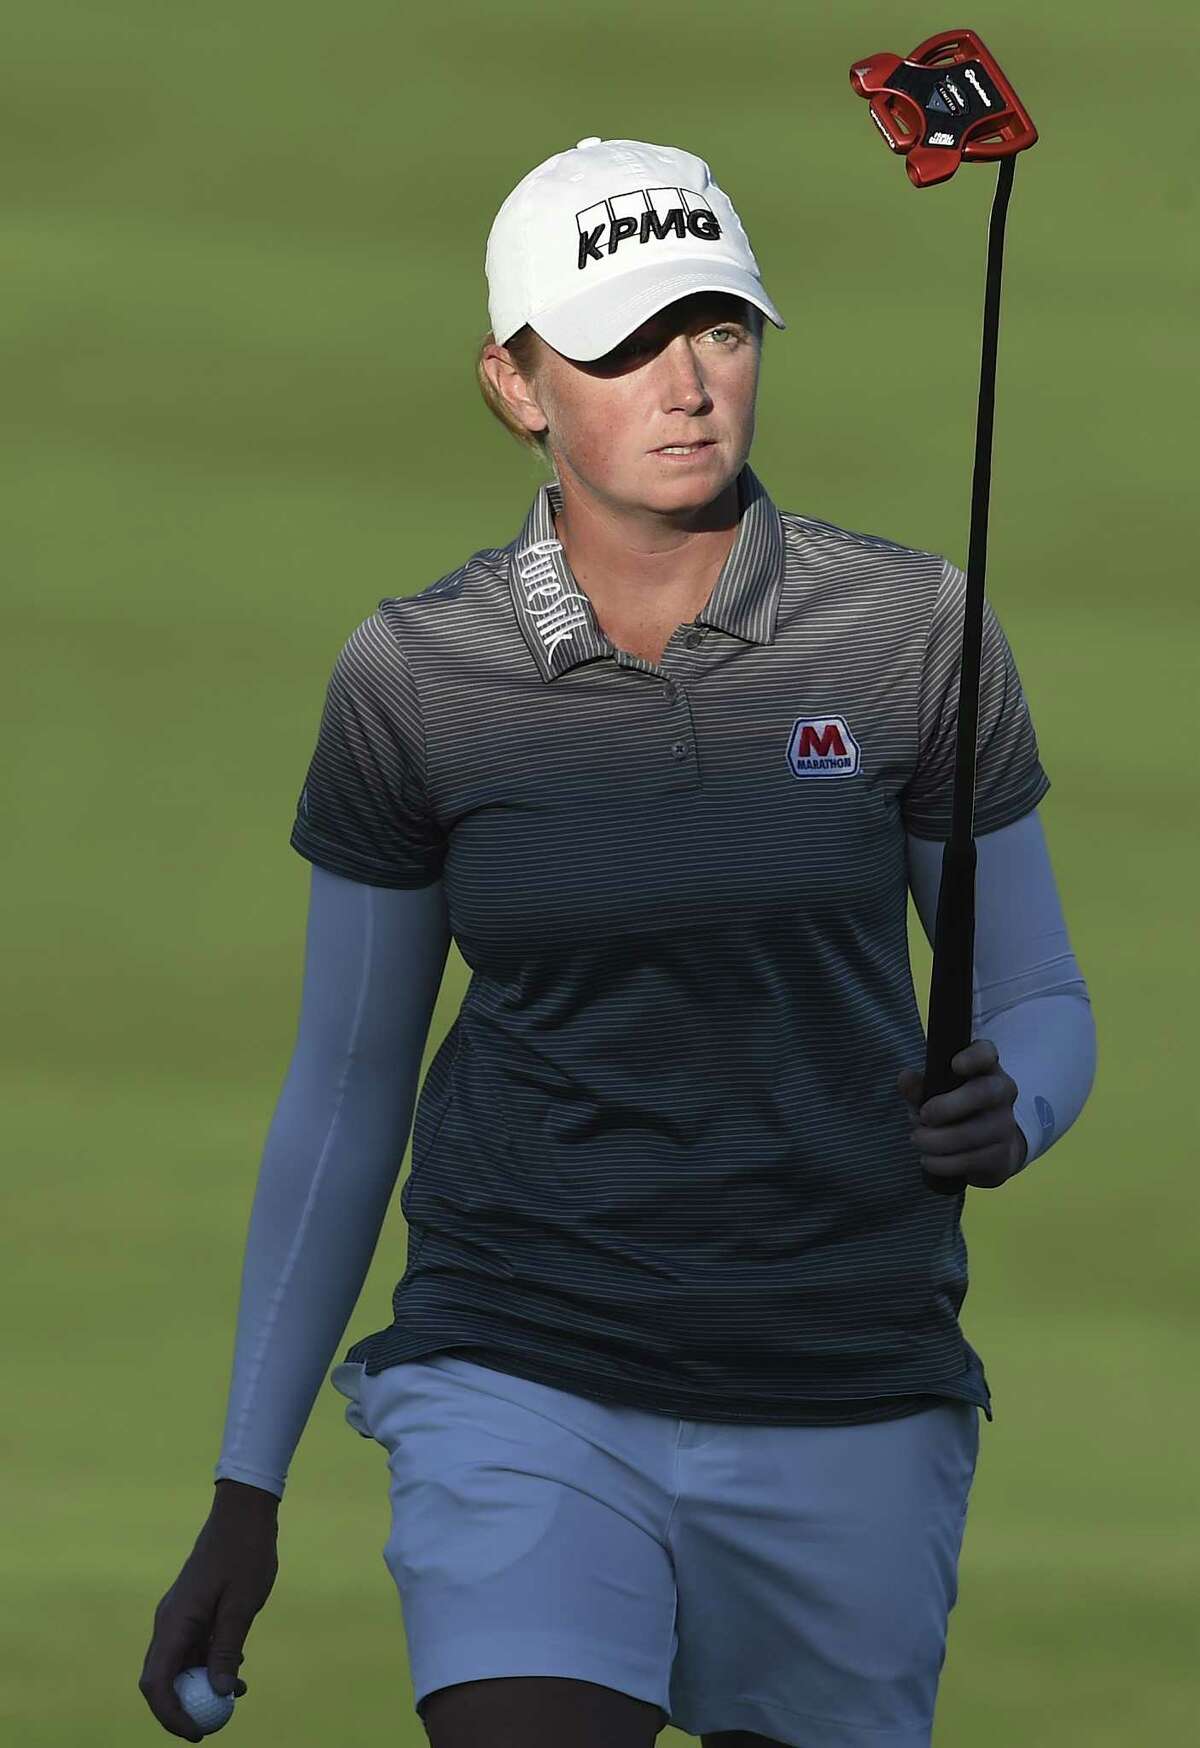 PHOENIX, AZ - MARCH 16: Stacy Lewis walks the 18th hole after finishing her round during the first round of the Bank Of Hope Founders Cup at Wildfire Golf Club at the JW Marriott Desert Ridge Resort on March 16, 2017 in Phoenix, Arizona. (Photo by Steve Dykes/Getty Images)